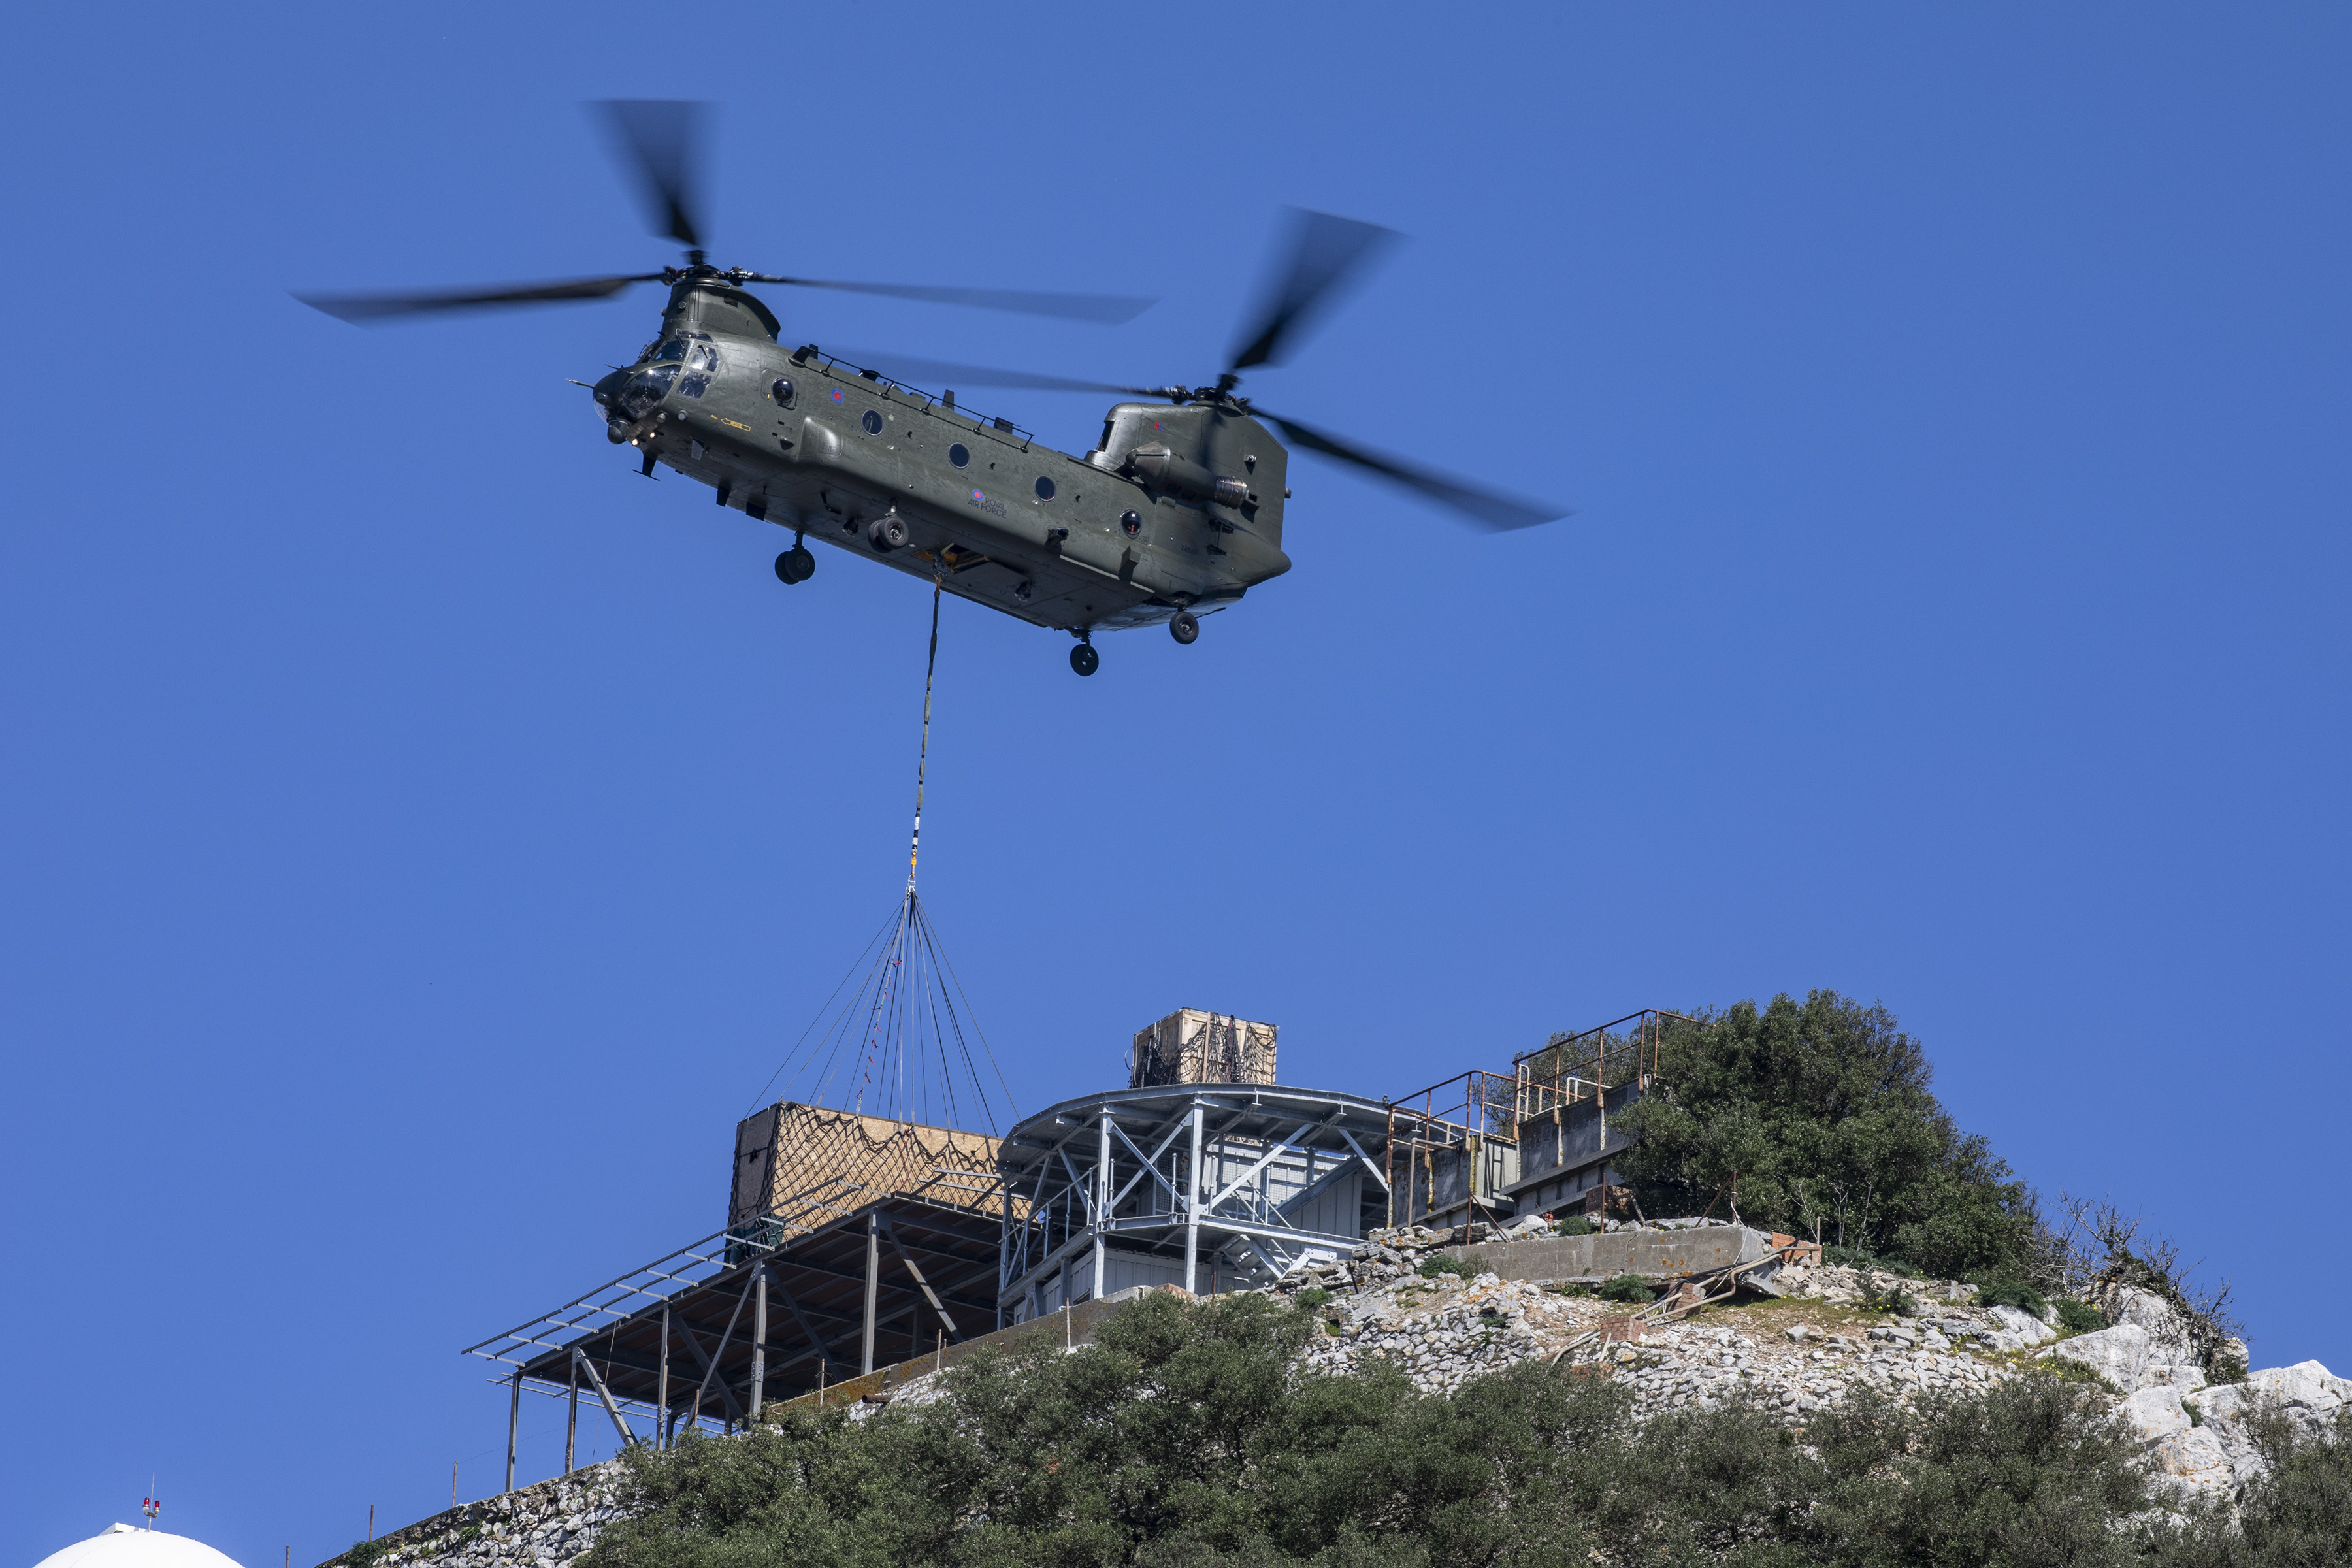 Chinook delivers cargo to the Rock of Gibraltar.